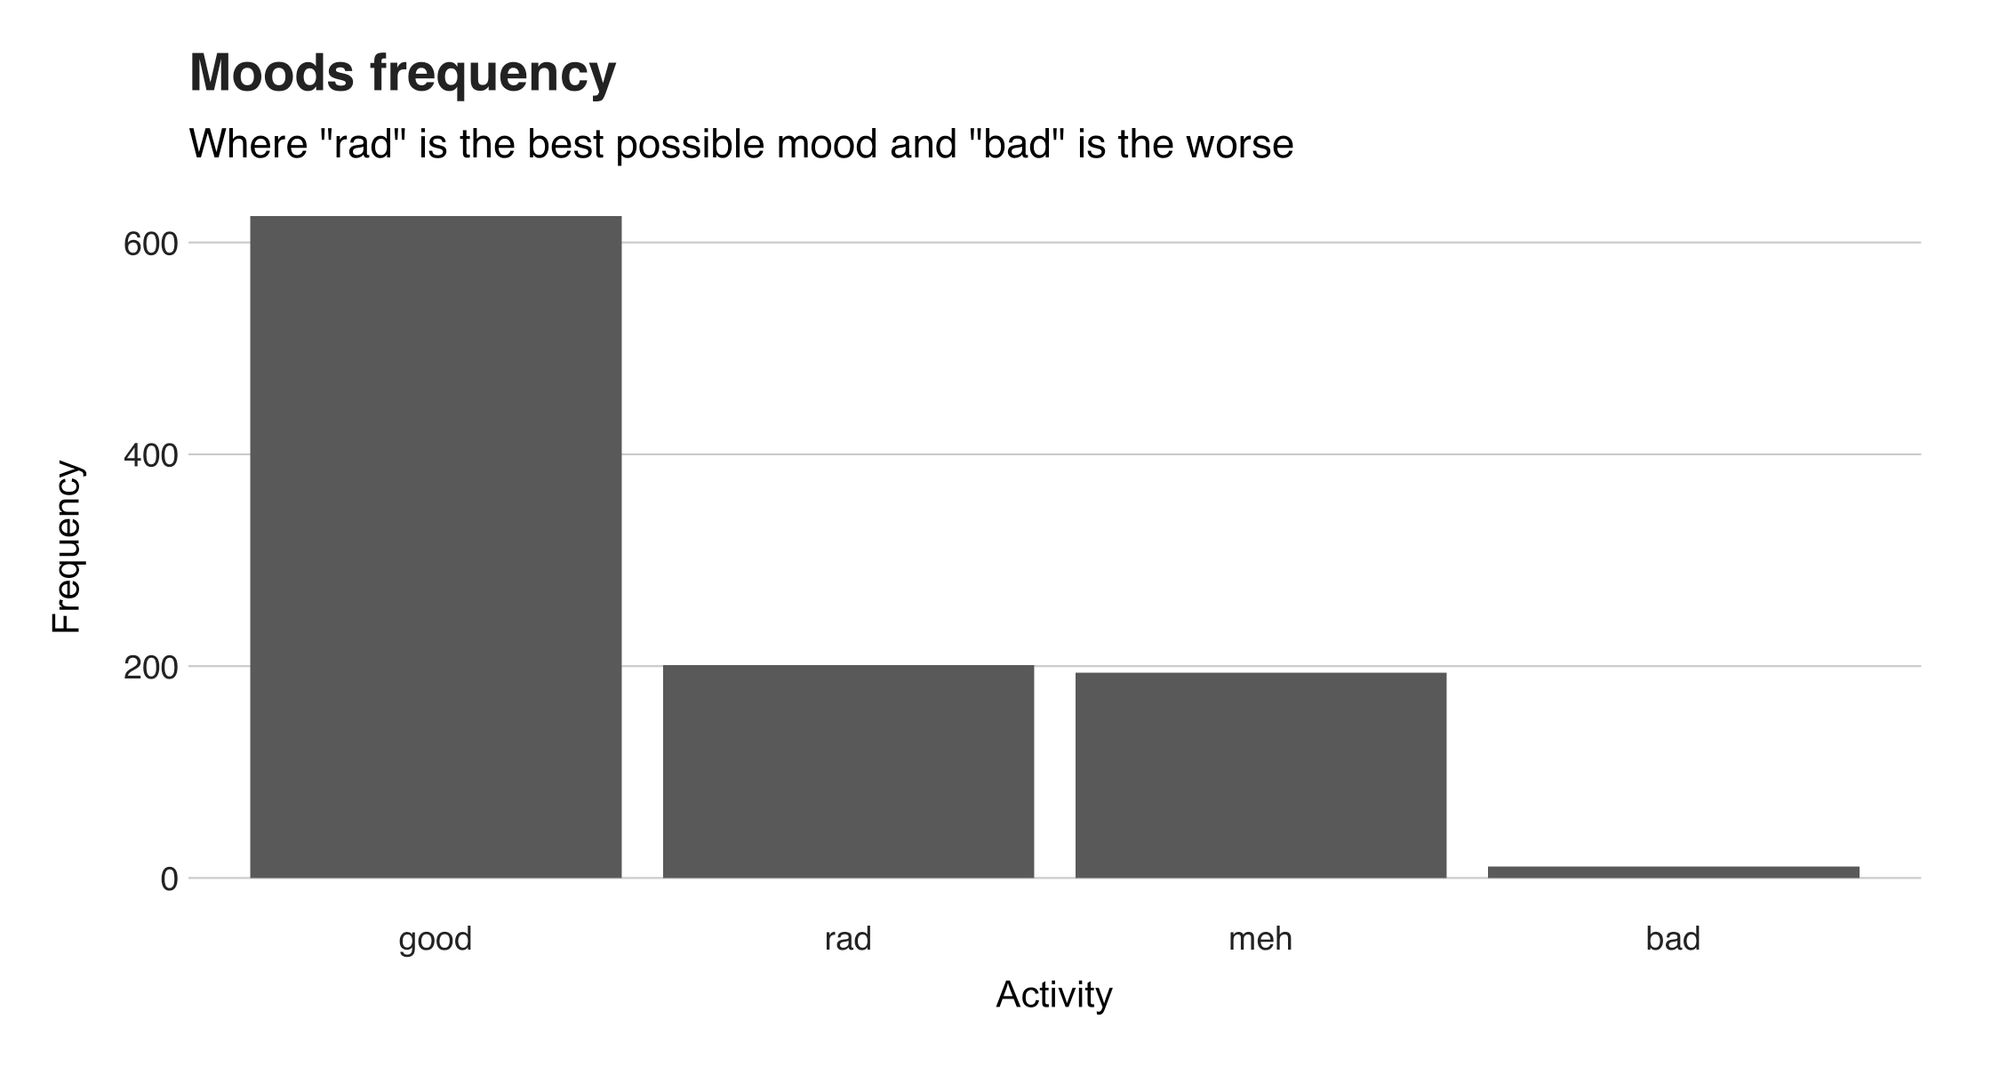 Figure 1. Moods frequency.